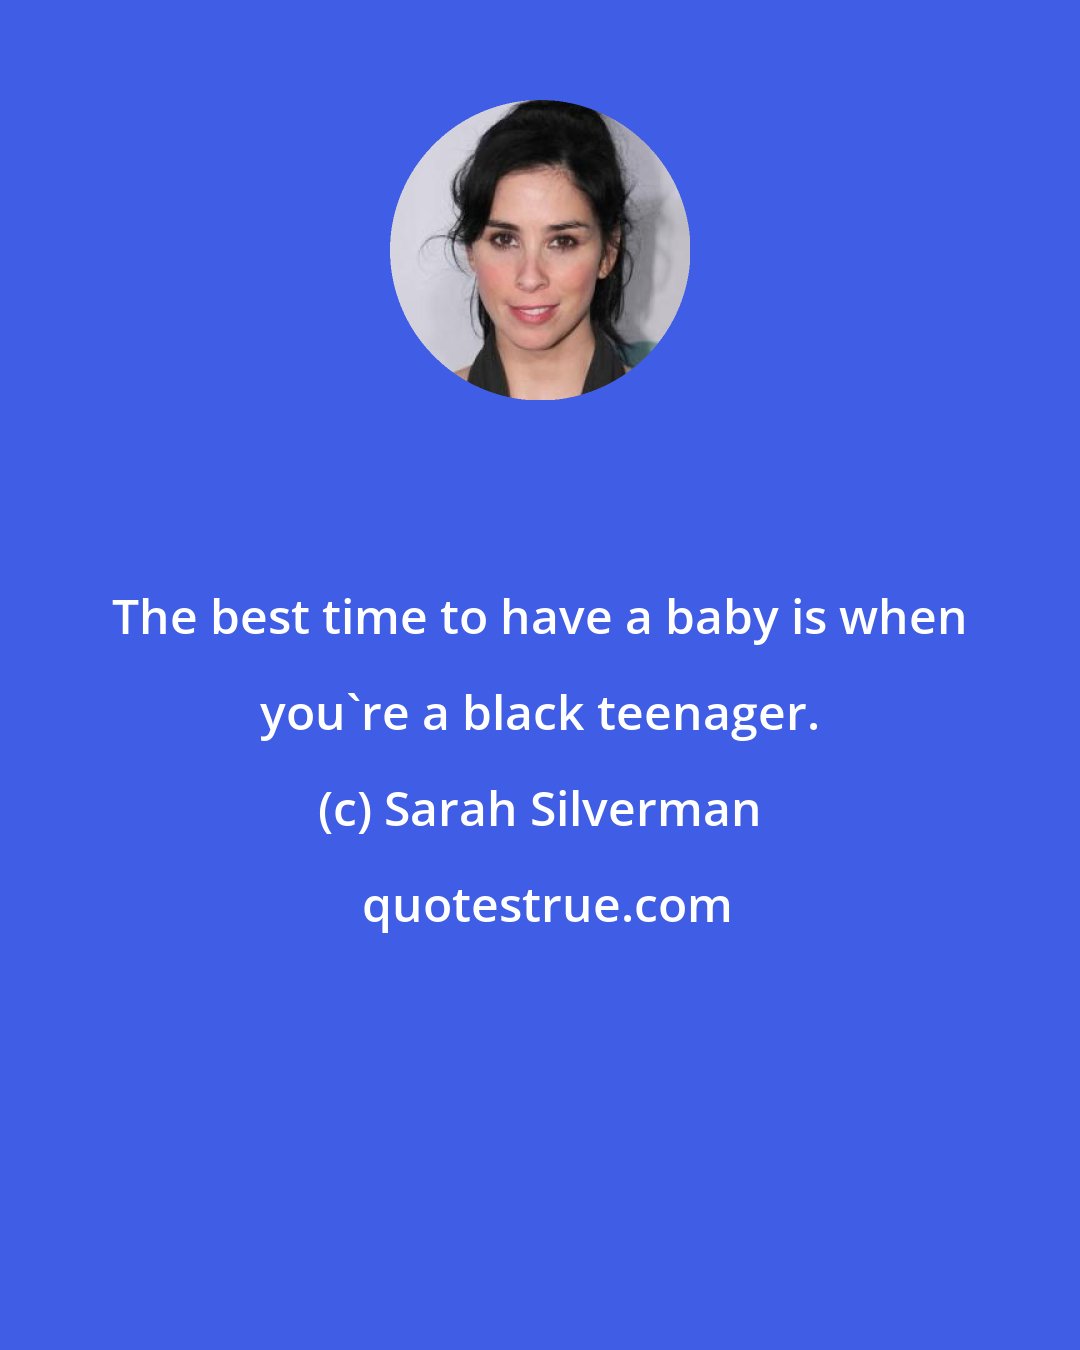 Sarah Silverman: The best time to have a baby is when you're a black teenager.